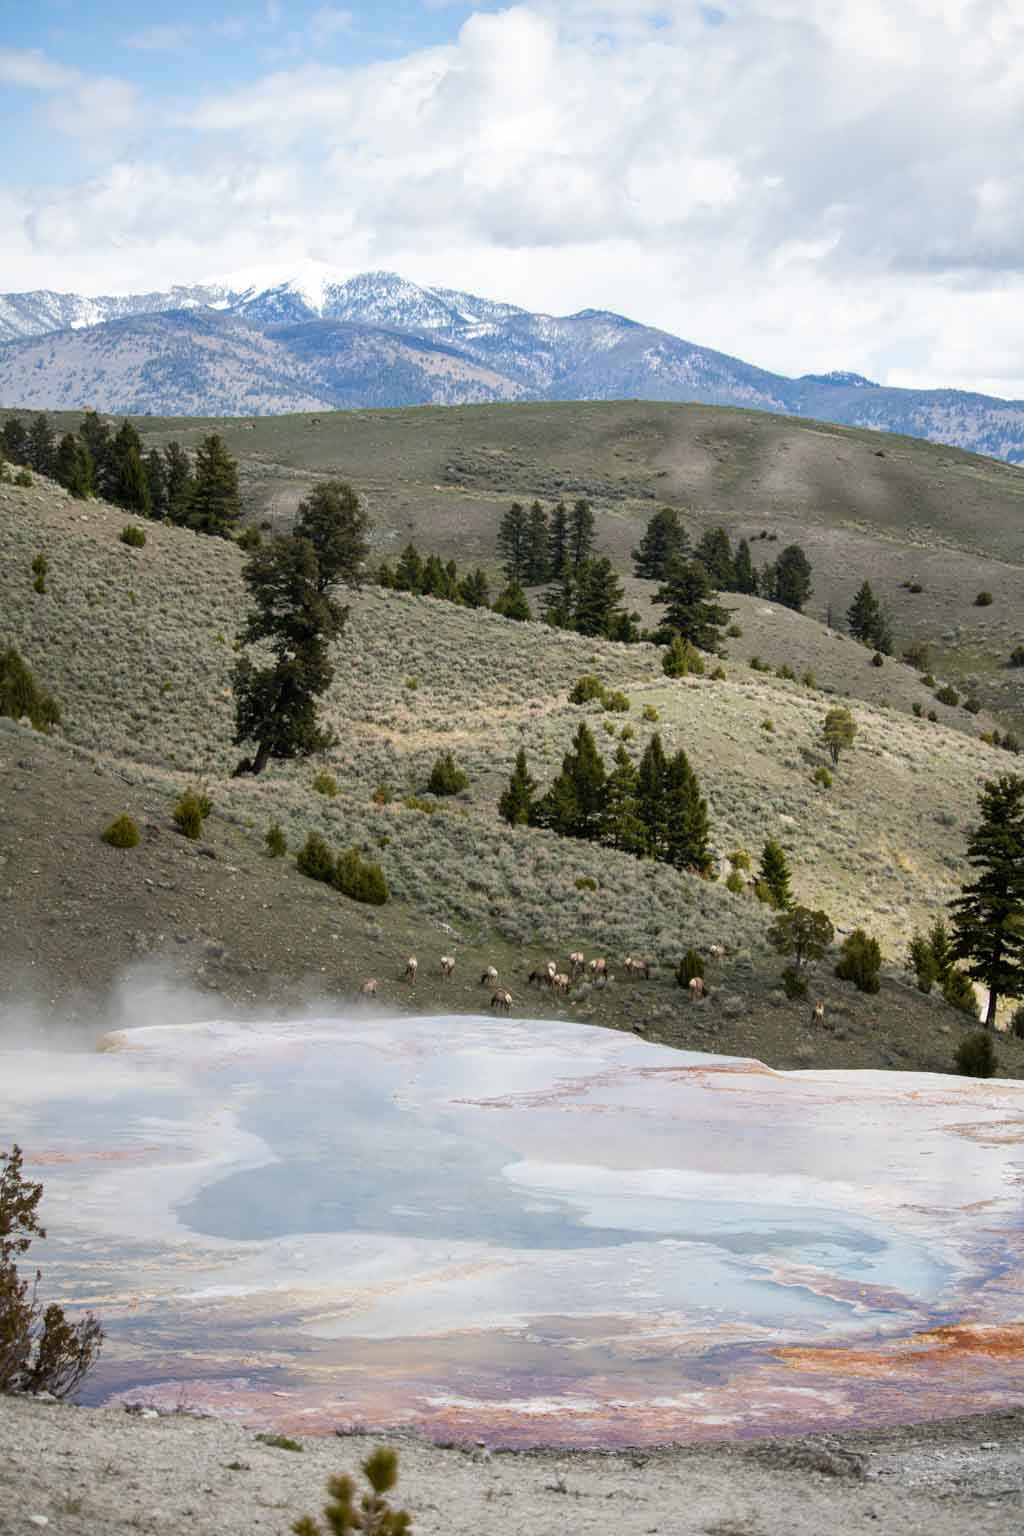 Palette Spring with elk at Mammoth Hot Springs, one of the best places for wildlife viewing in Yellowstone National Park